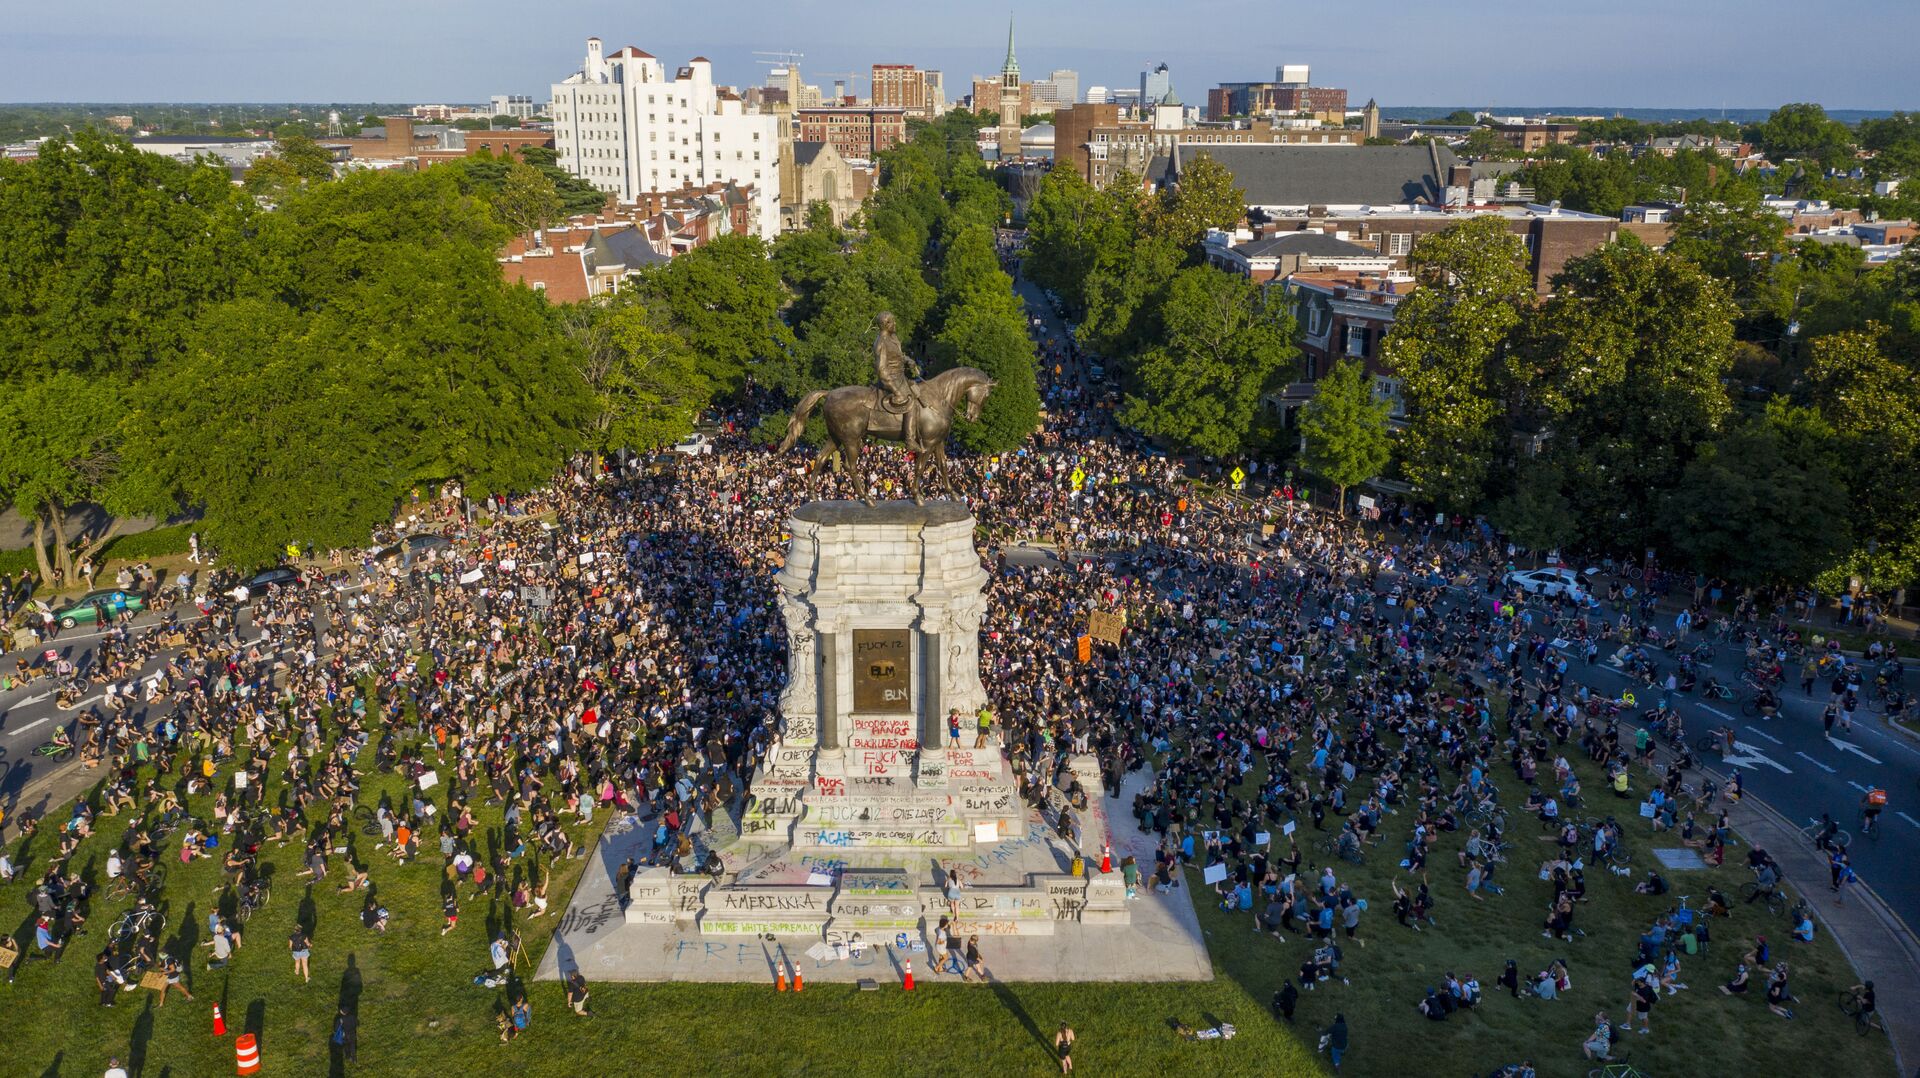 This Tuesday, June 2, 2020 file photo shows a large group of protesters gather around the statue of Confederate General Robert E. Lee on Monument Avenue near downtown in Richmond, Va. Virginia Gov. Ralph Northam is expected to announce plans Thursday for the removal of an iconic statue of Confederate Gen. Robert E. Lee from Richmond's prominent Monument Avenue. - Sputnik International, 1920, 07.09.2021